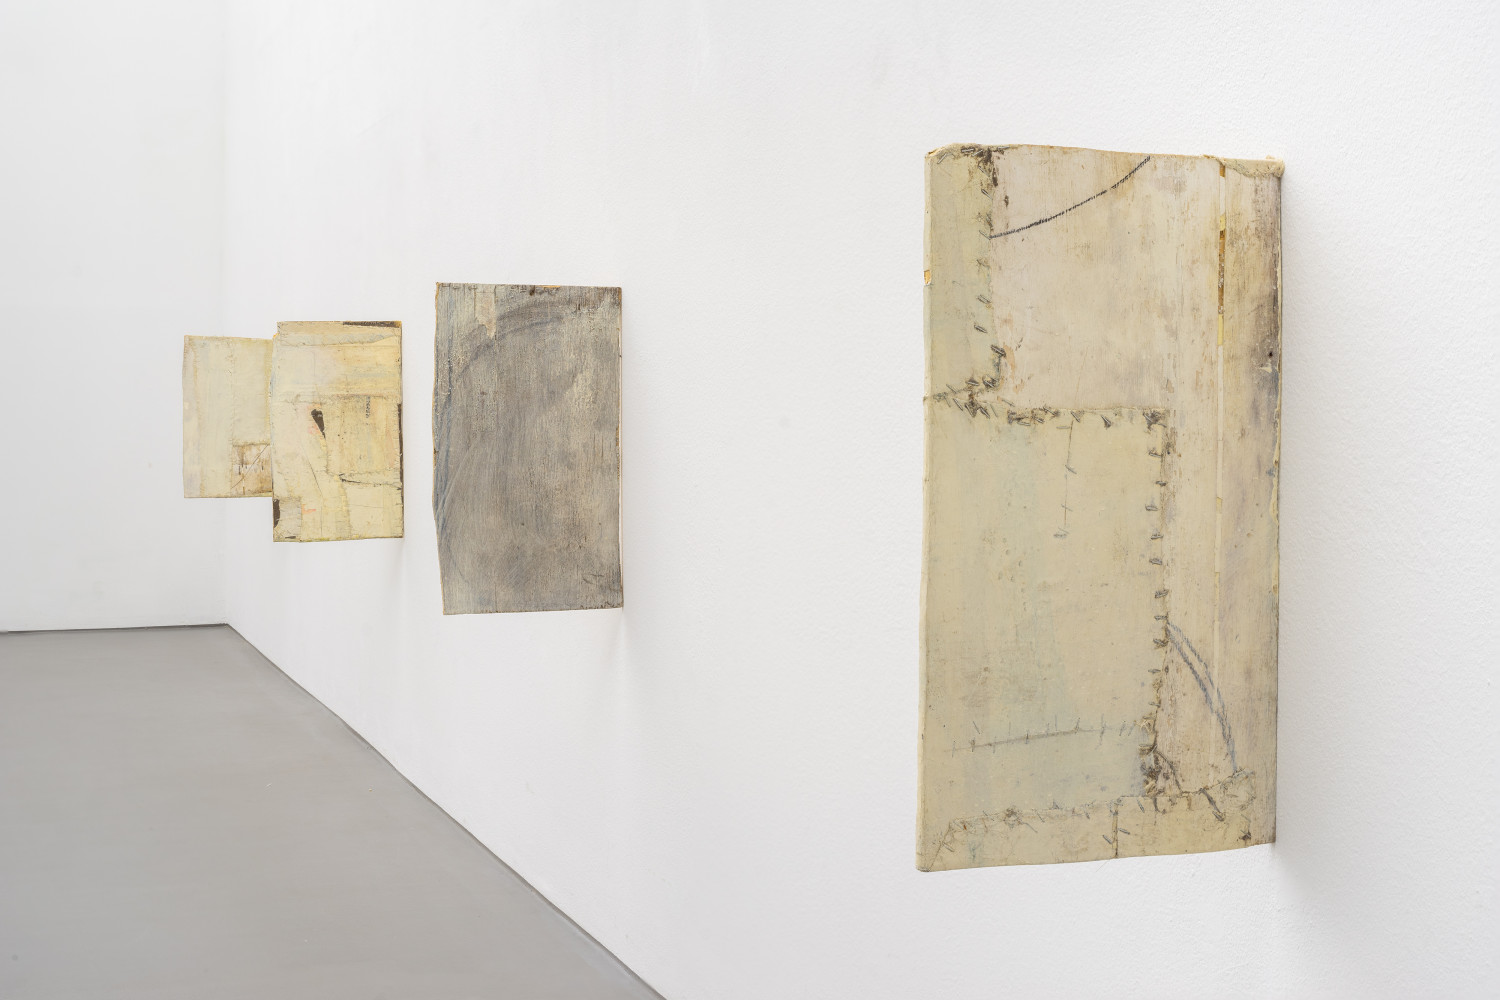 Lawrence Carroll, ‘Page Paintings’, Installationsansicht, Buchmann Galerie